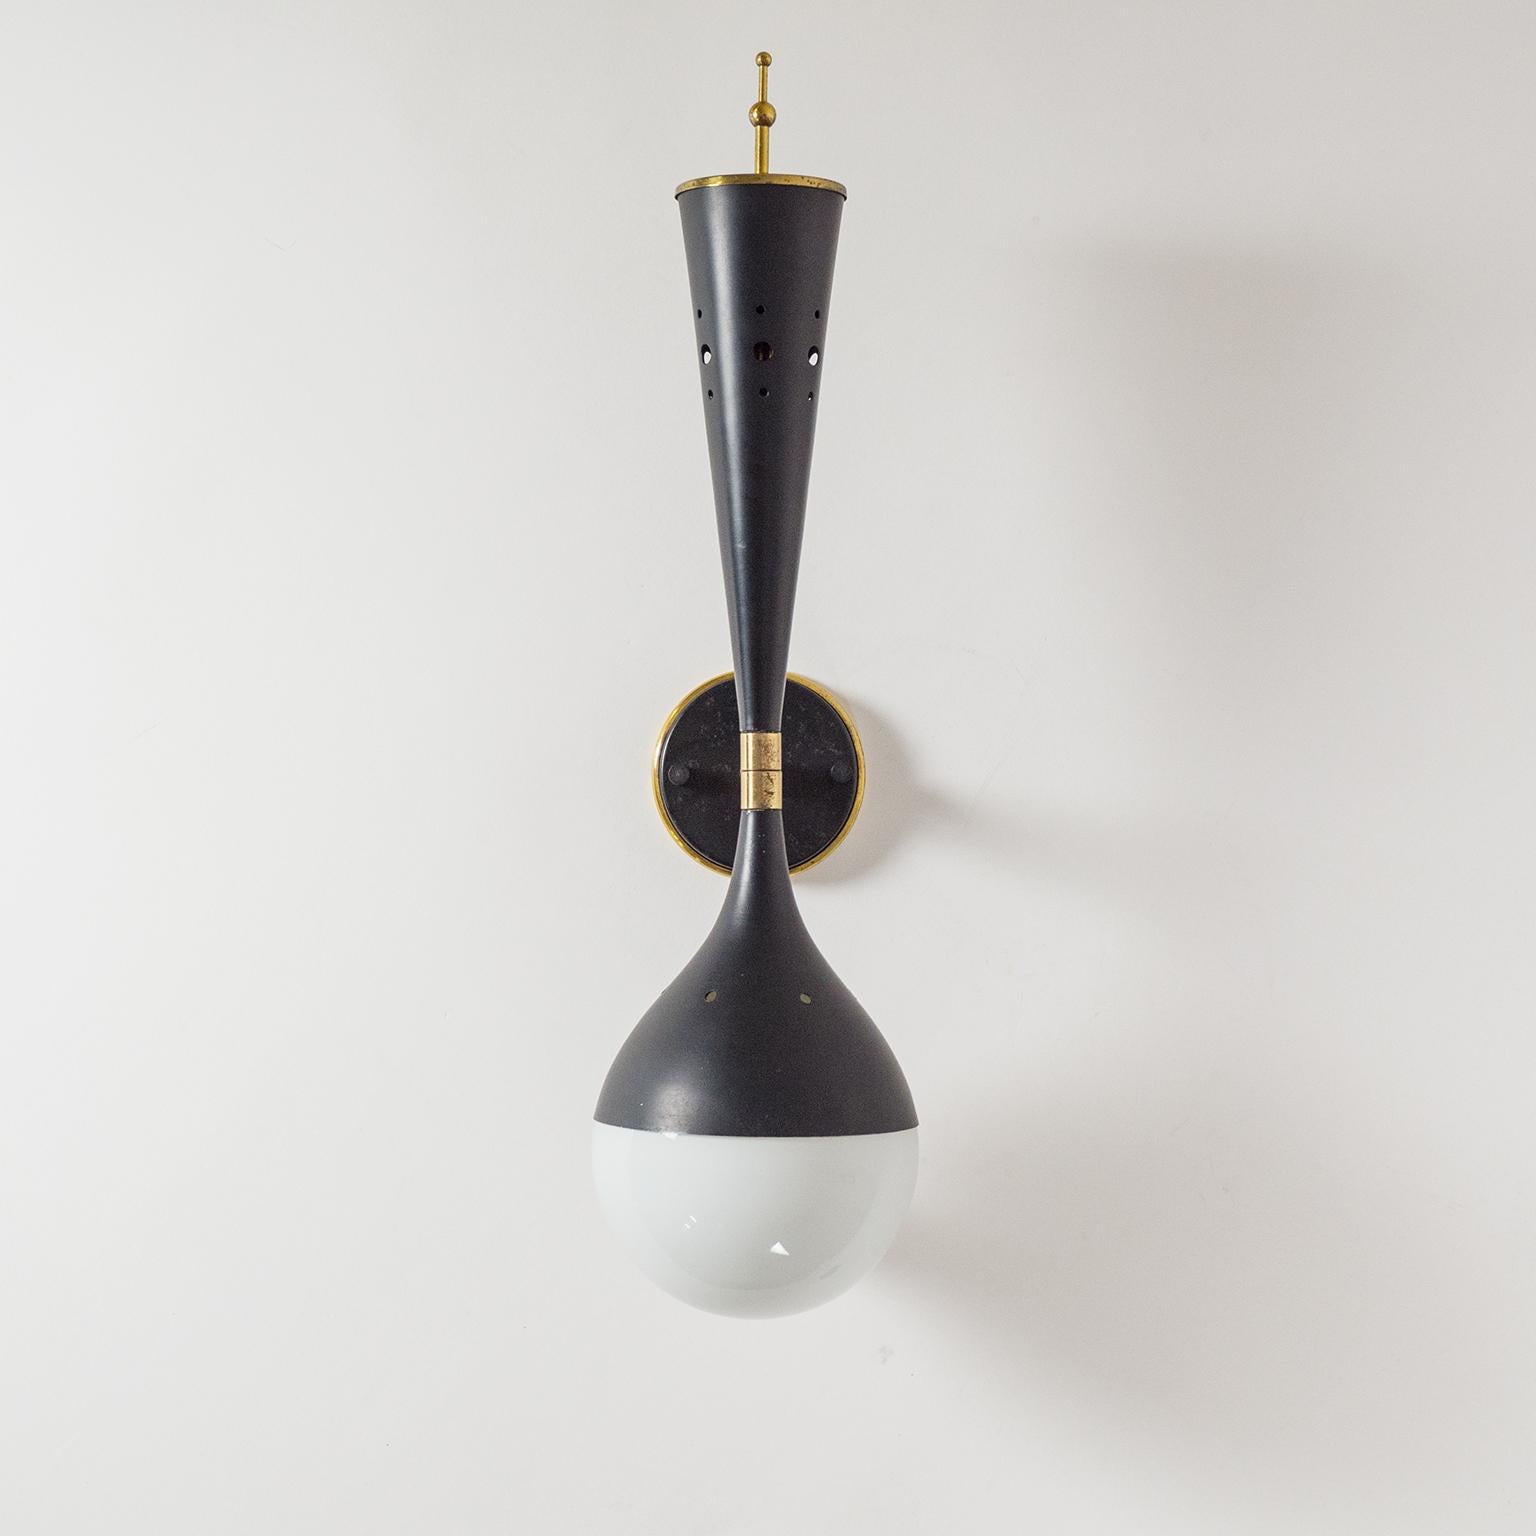 Very unique Italian wall light from the 1950s, attributed to Stilnovo. Dual-cone shape with a cased glass globe on the bottom and a small brass 